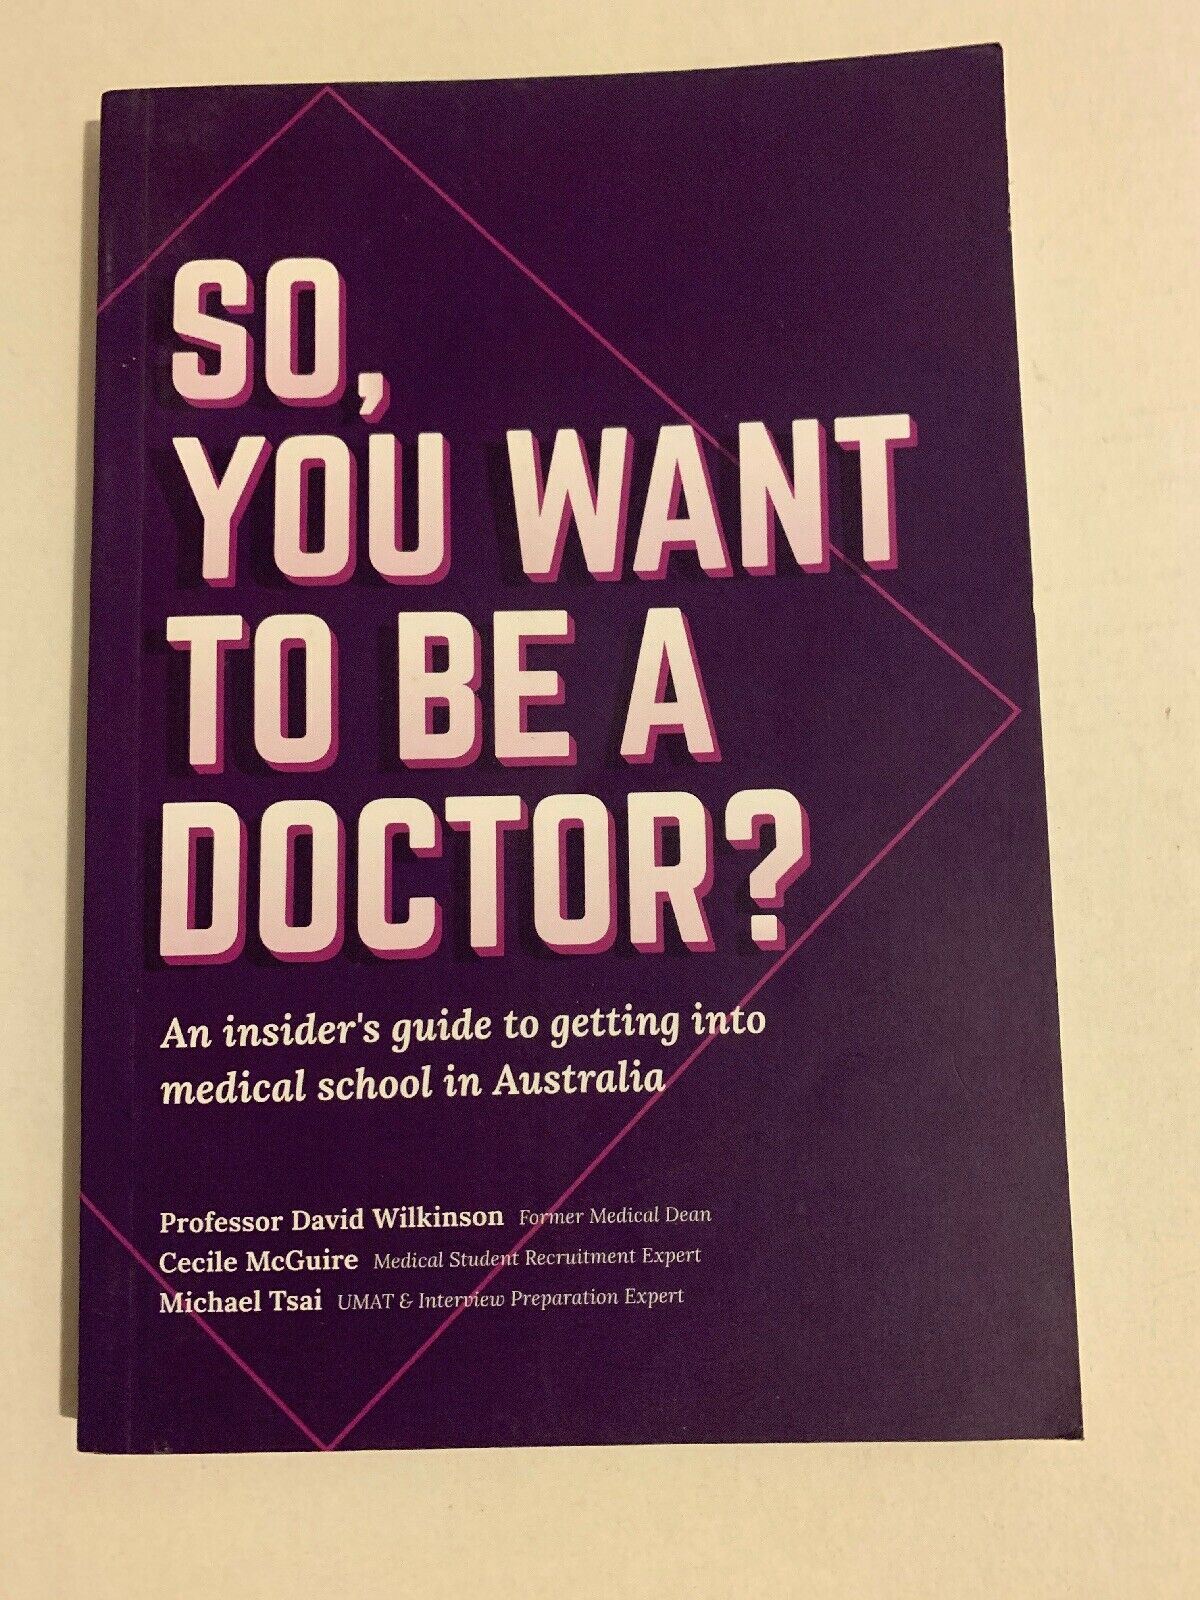 So, You Want To Be A Doctor? Guide To Getting Into Australian Medical School